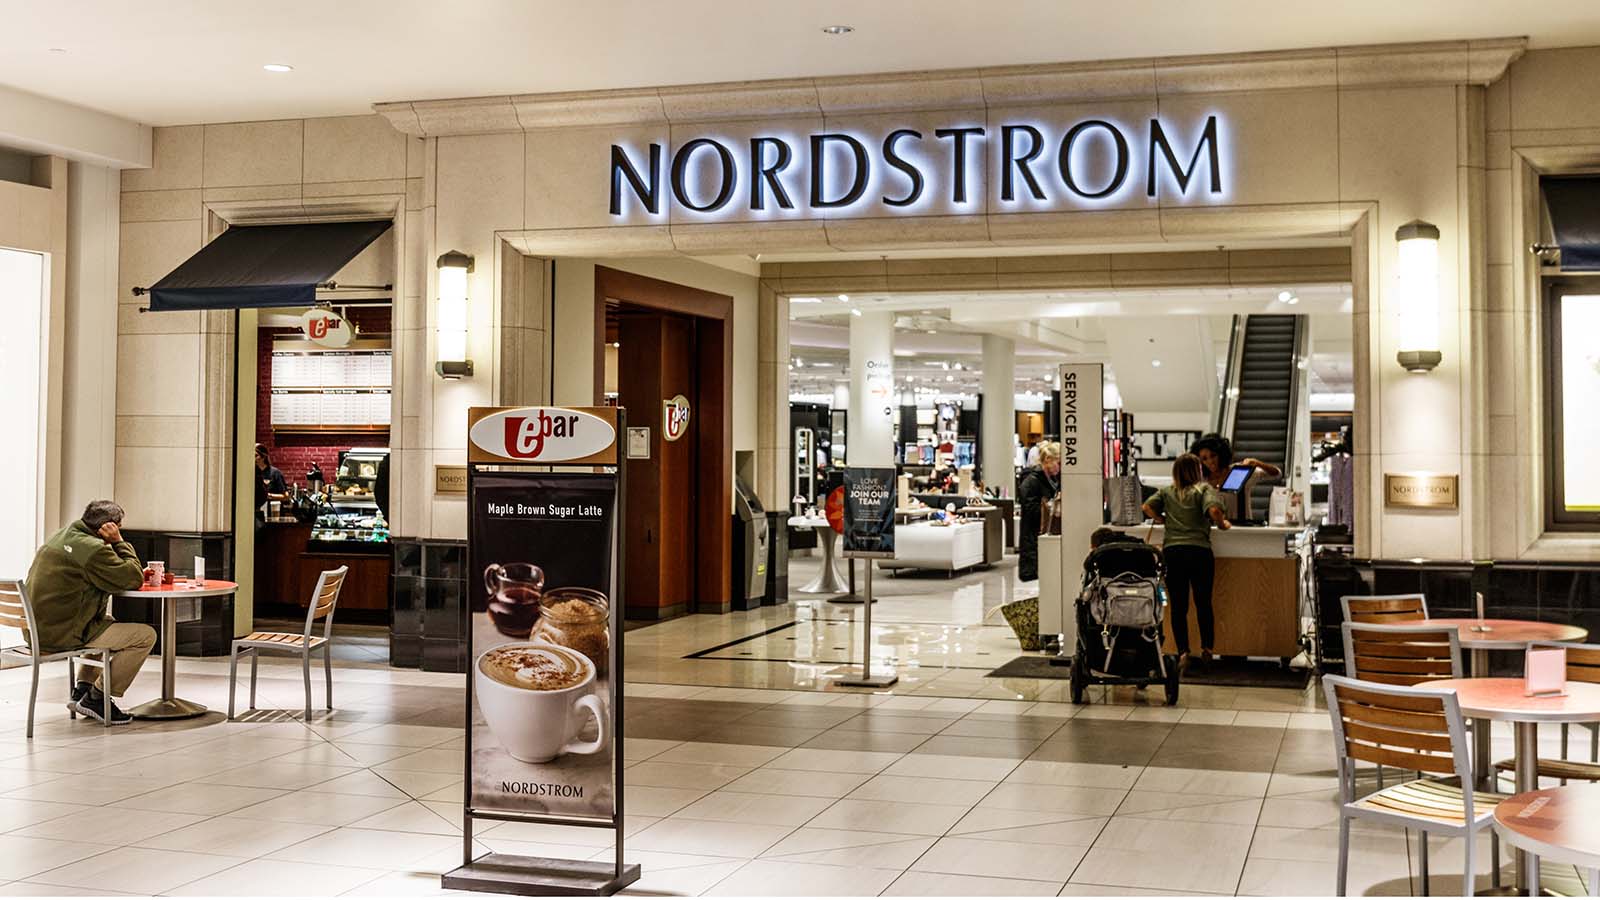 A Nordstrom (JWN Stock) storefront in Toronto, Canada.